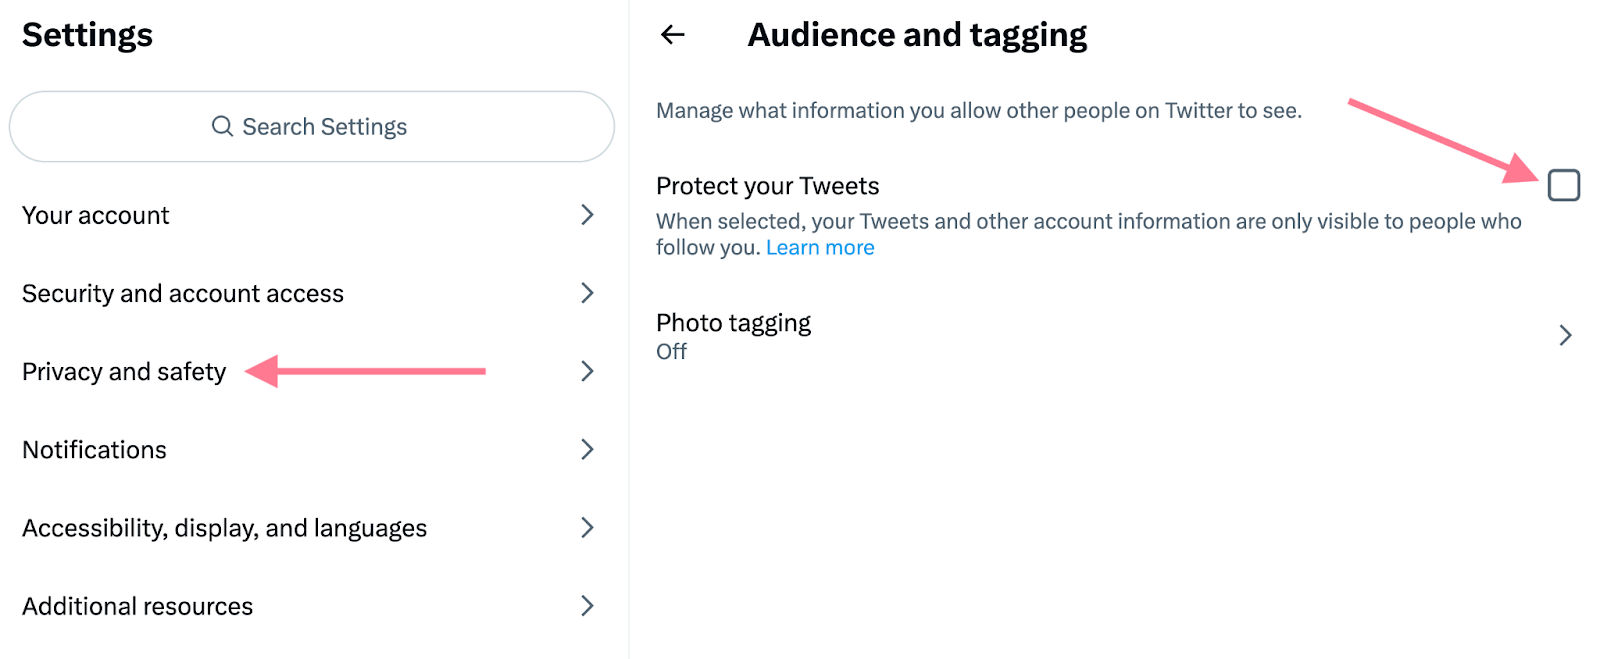 protect (or unprotect) tweets checkbox